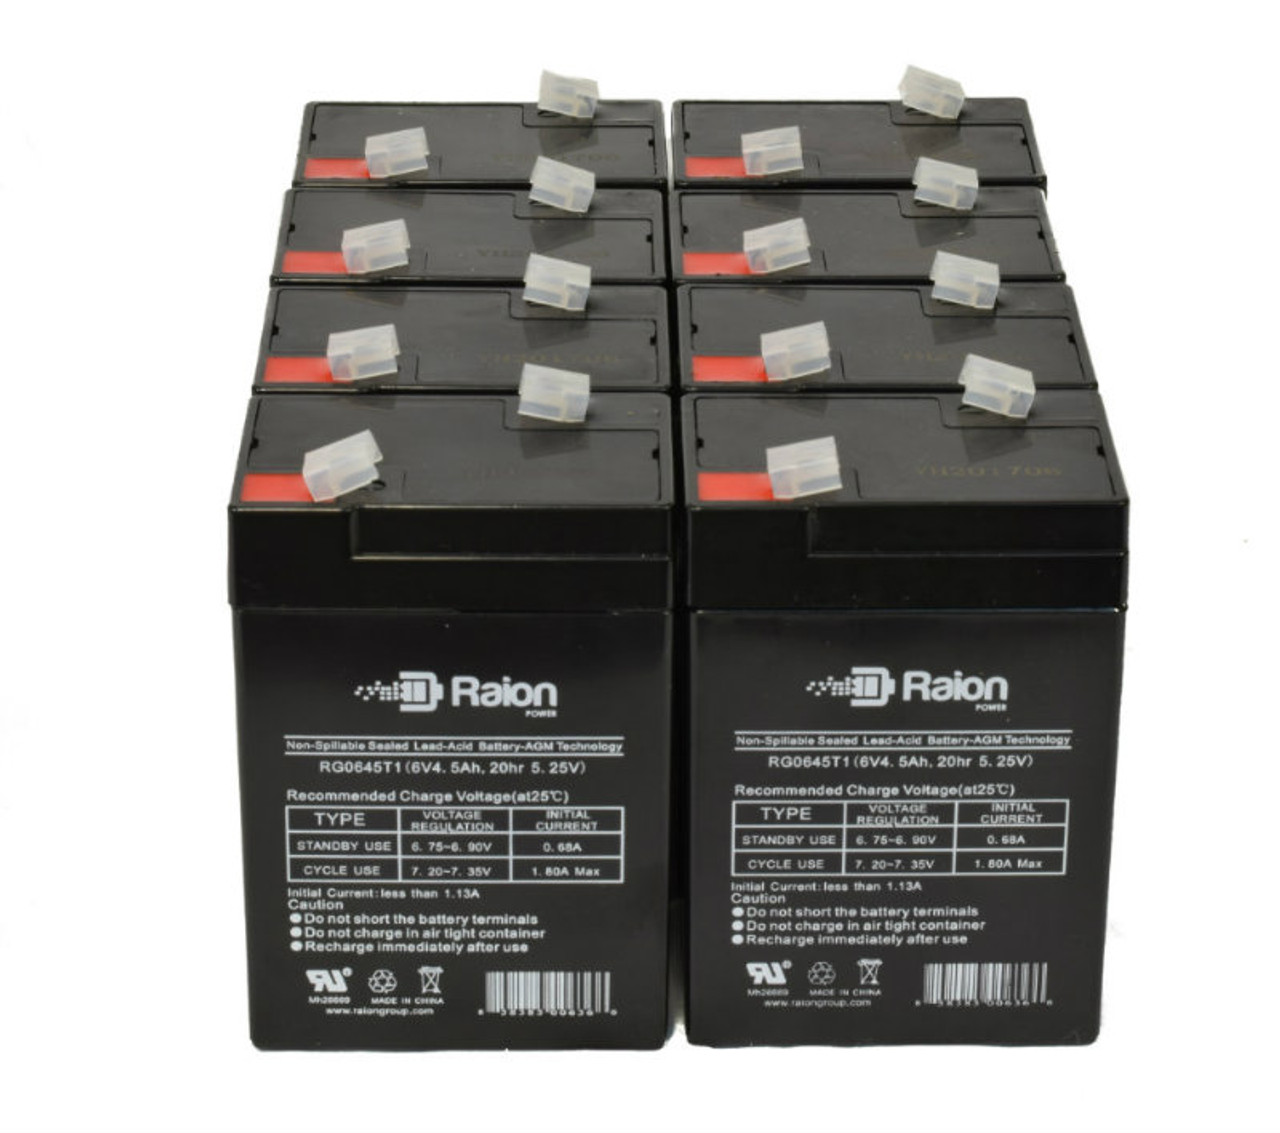 Raion Power 6 Volt 4.5Ah RG0645T1 Replacement Battery for Genesis NP5-6 - 8 Pack